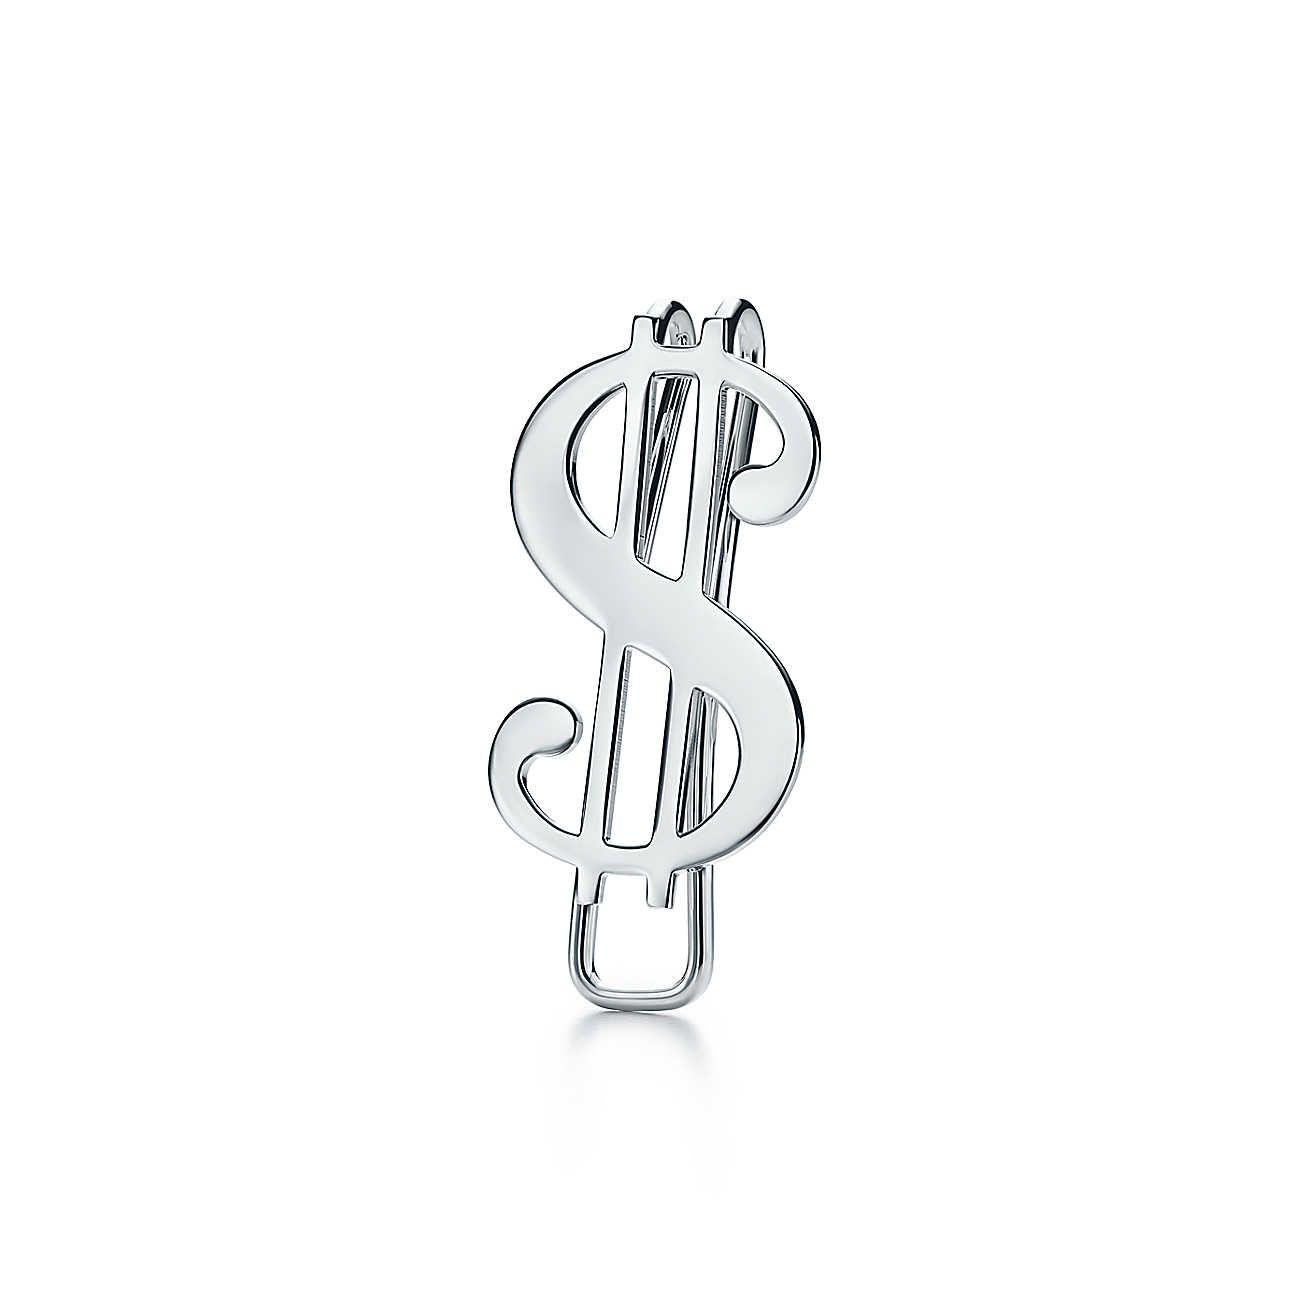 Black and White Retirement Logo - Out of Retirement dollar sign money clip in sterling silver